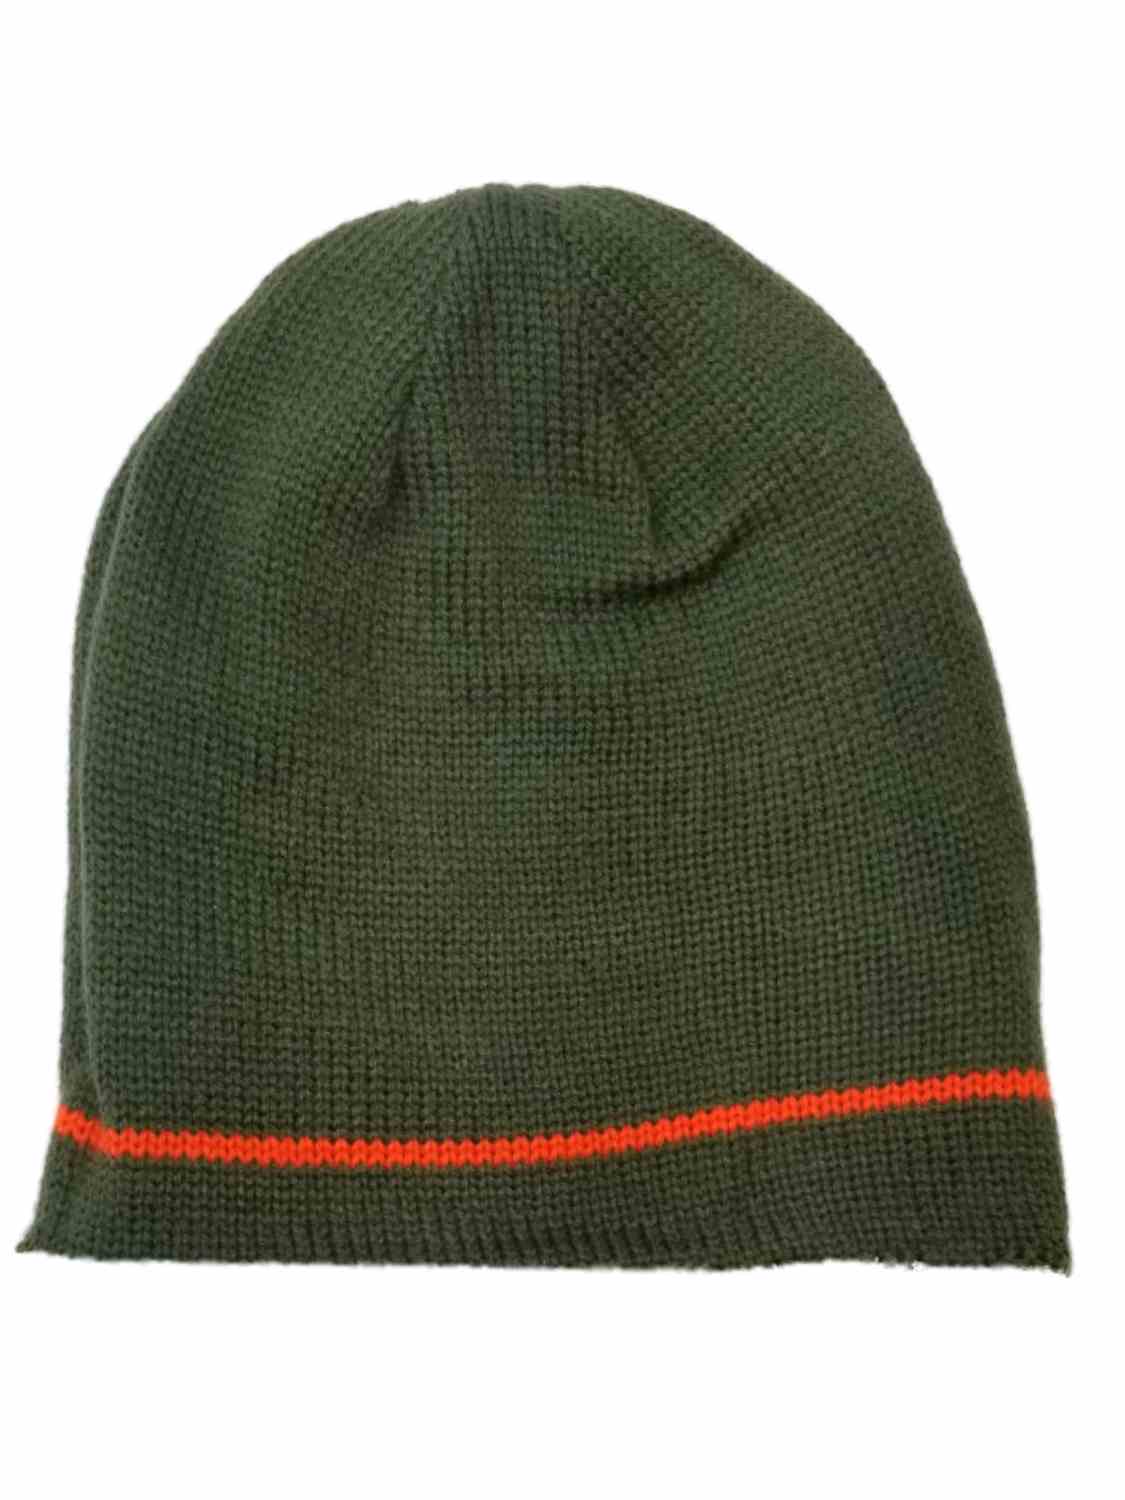 Men's Olive Green with Accent stripe Winter Reversible Beanie Stocking Cap Hat - image 2 of 2